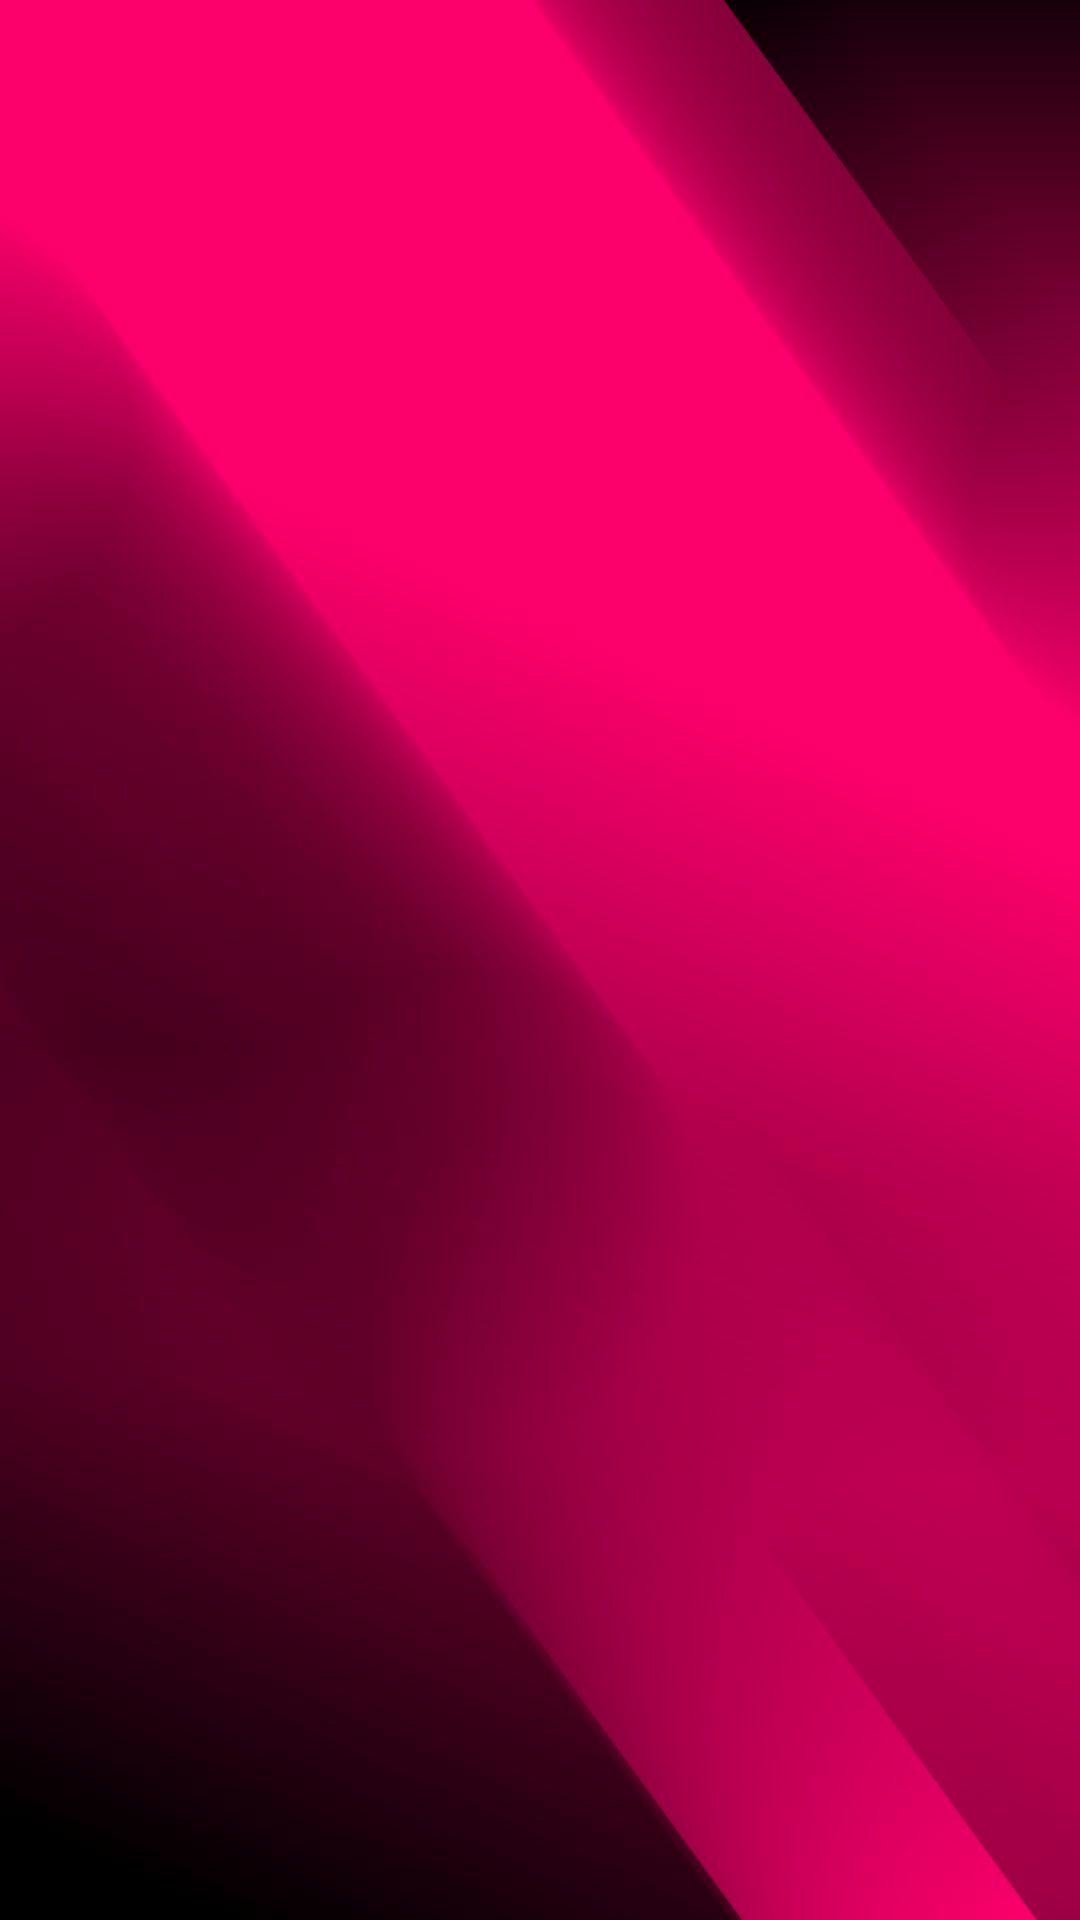 Wallpaper.wiki Cool Pink Iphone Background HD PIC